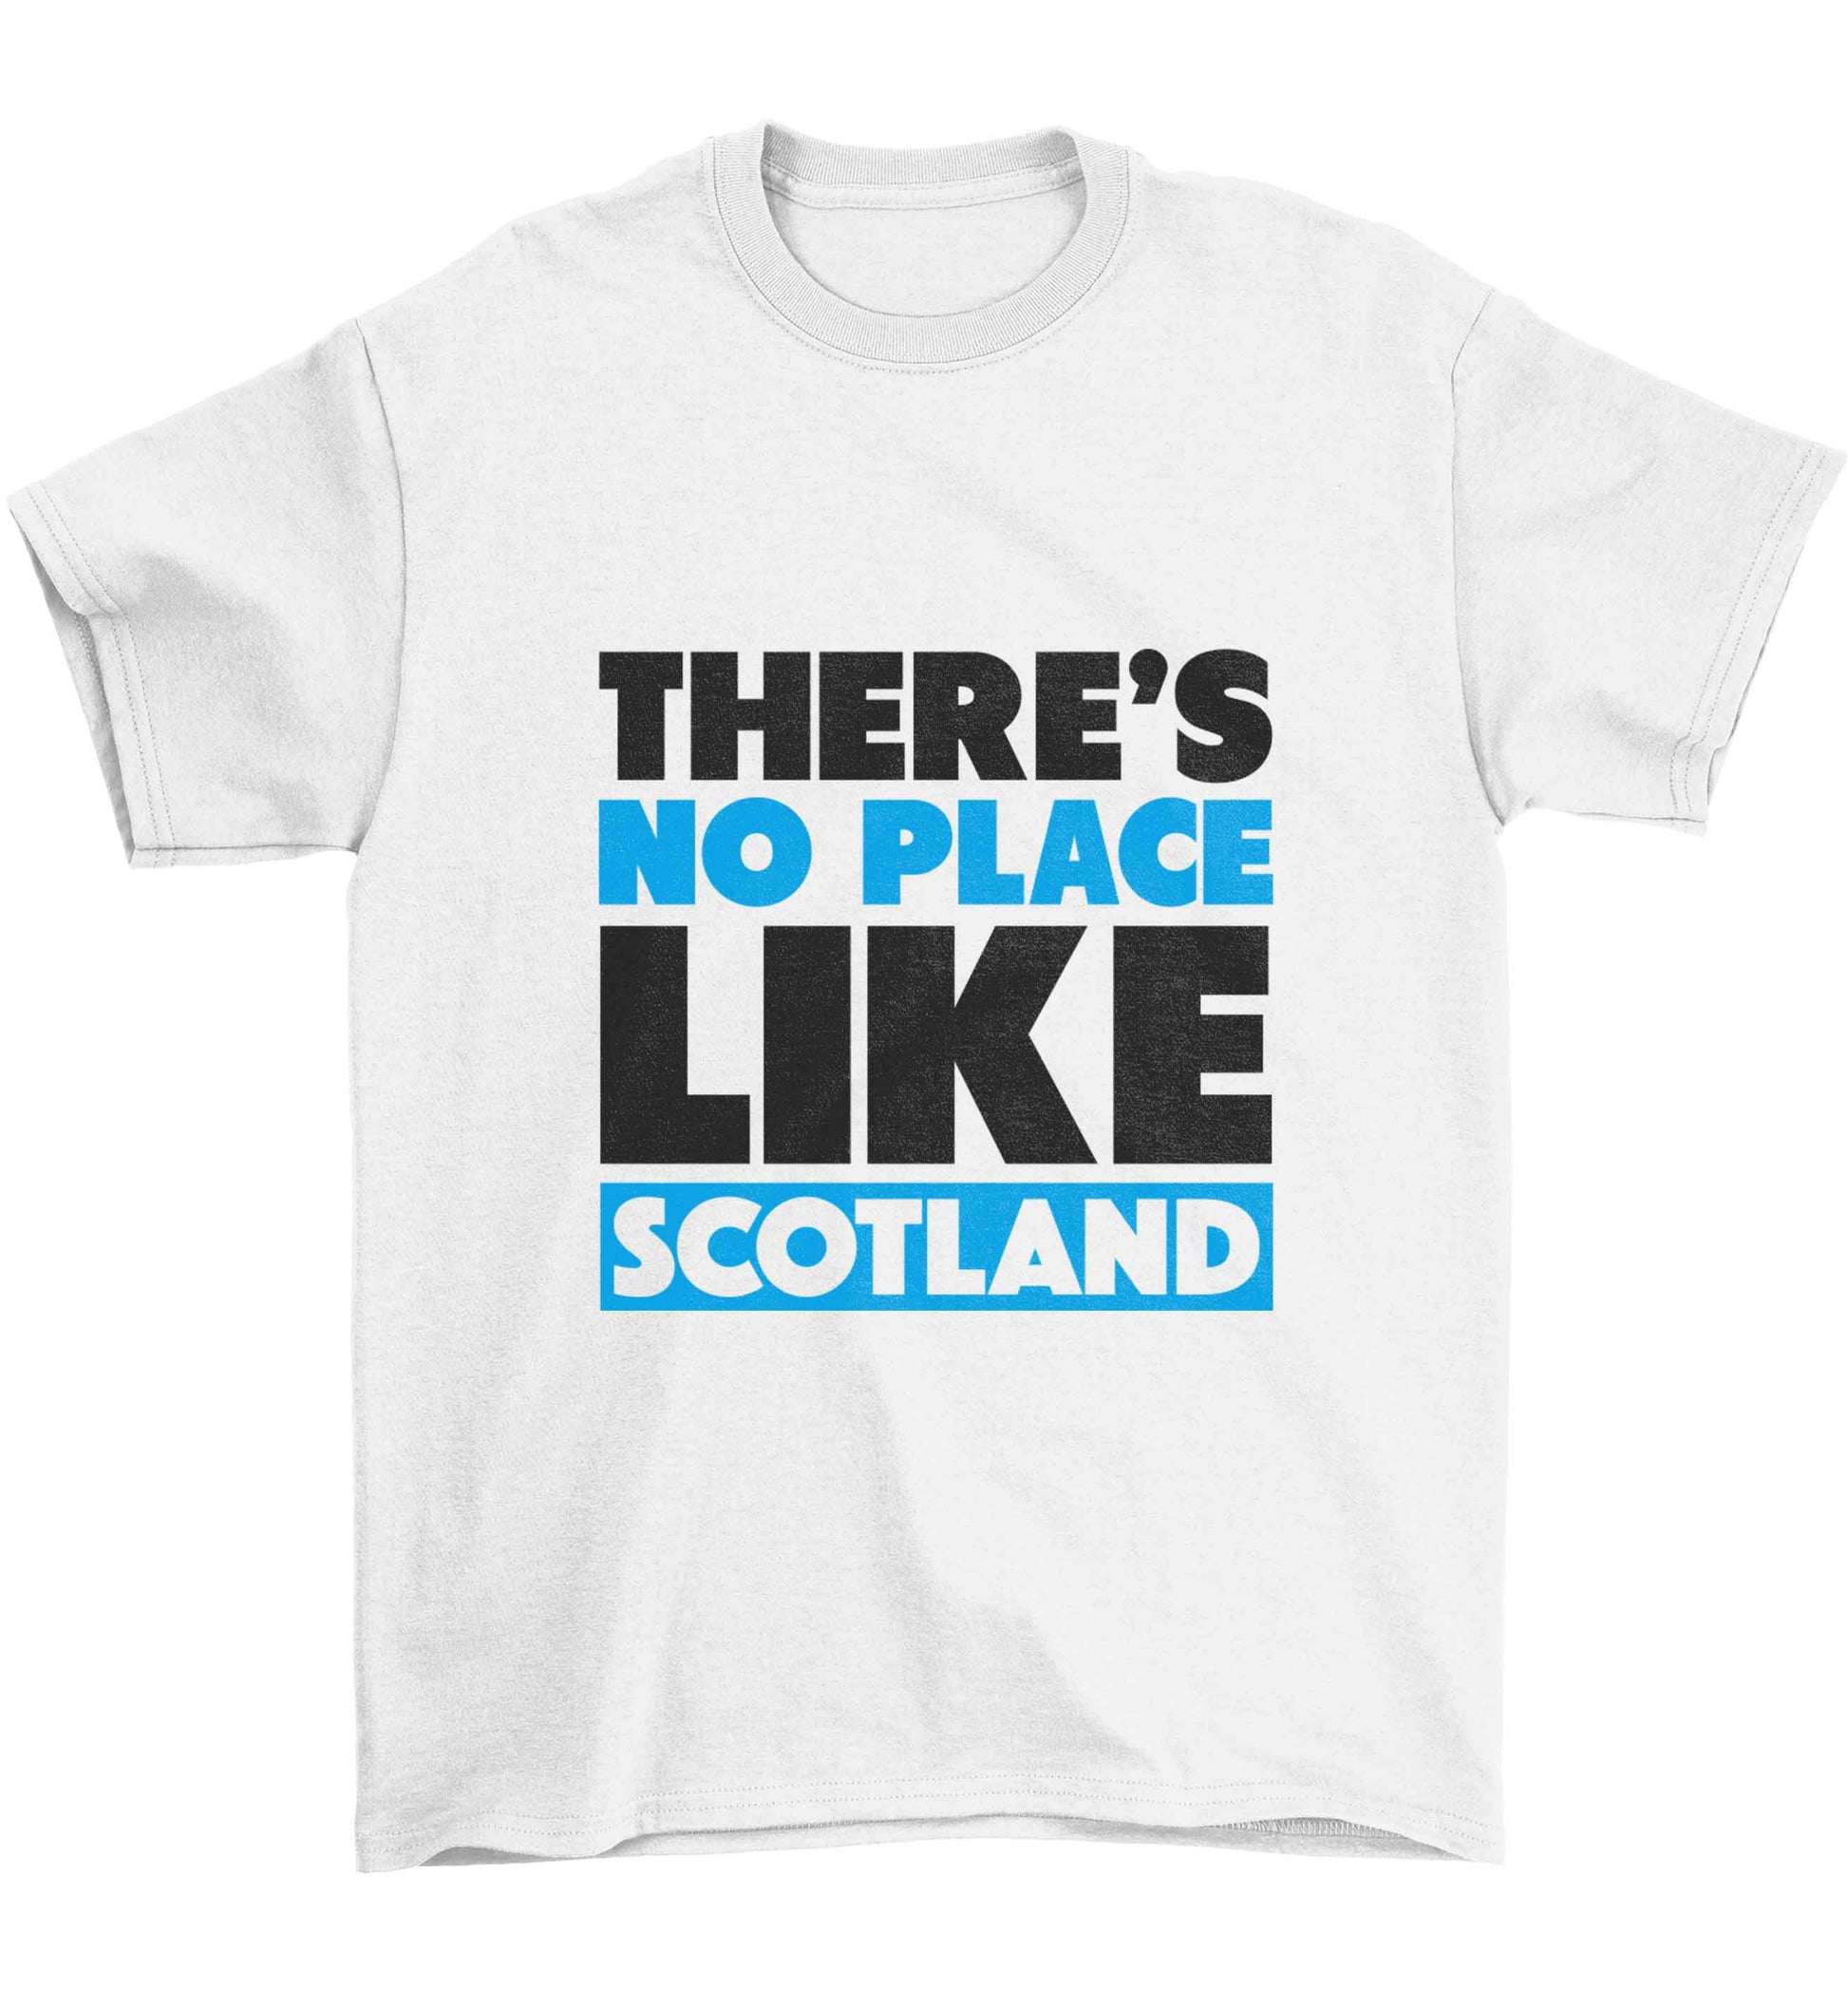 There's no place like Scotland Children's white Tshirt 12-13 Years